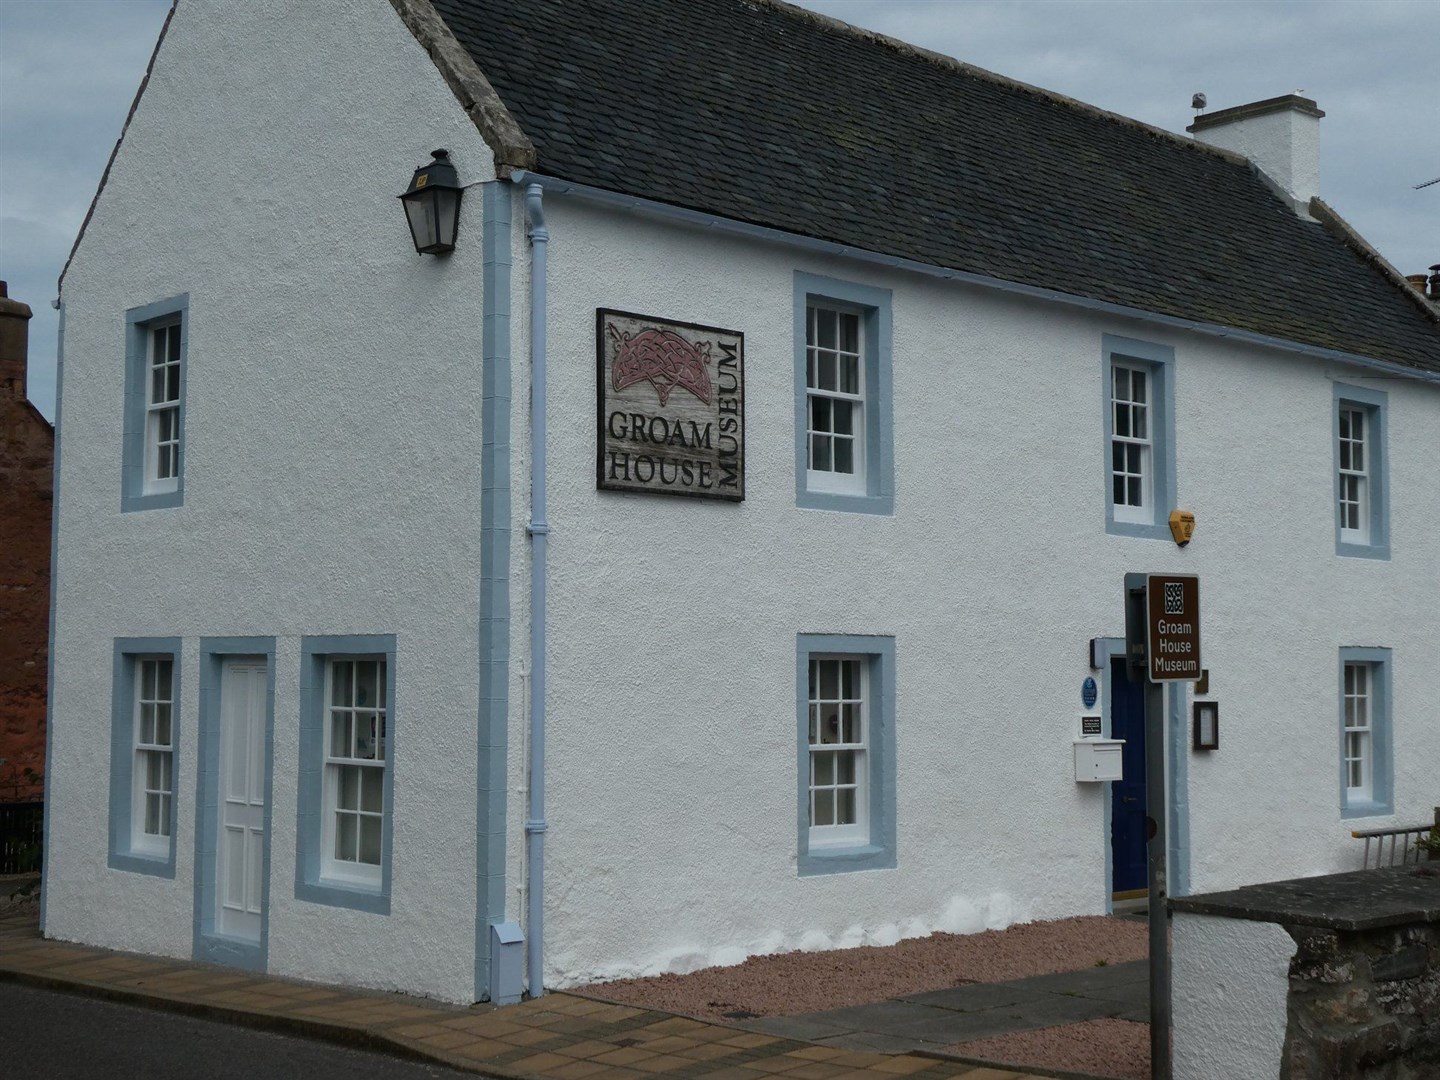 Groam House Museum in Rosemarkie after its exterior makeover.